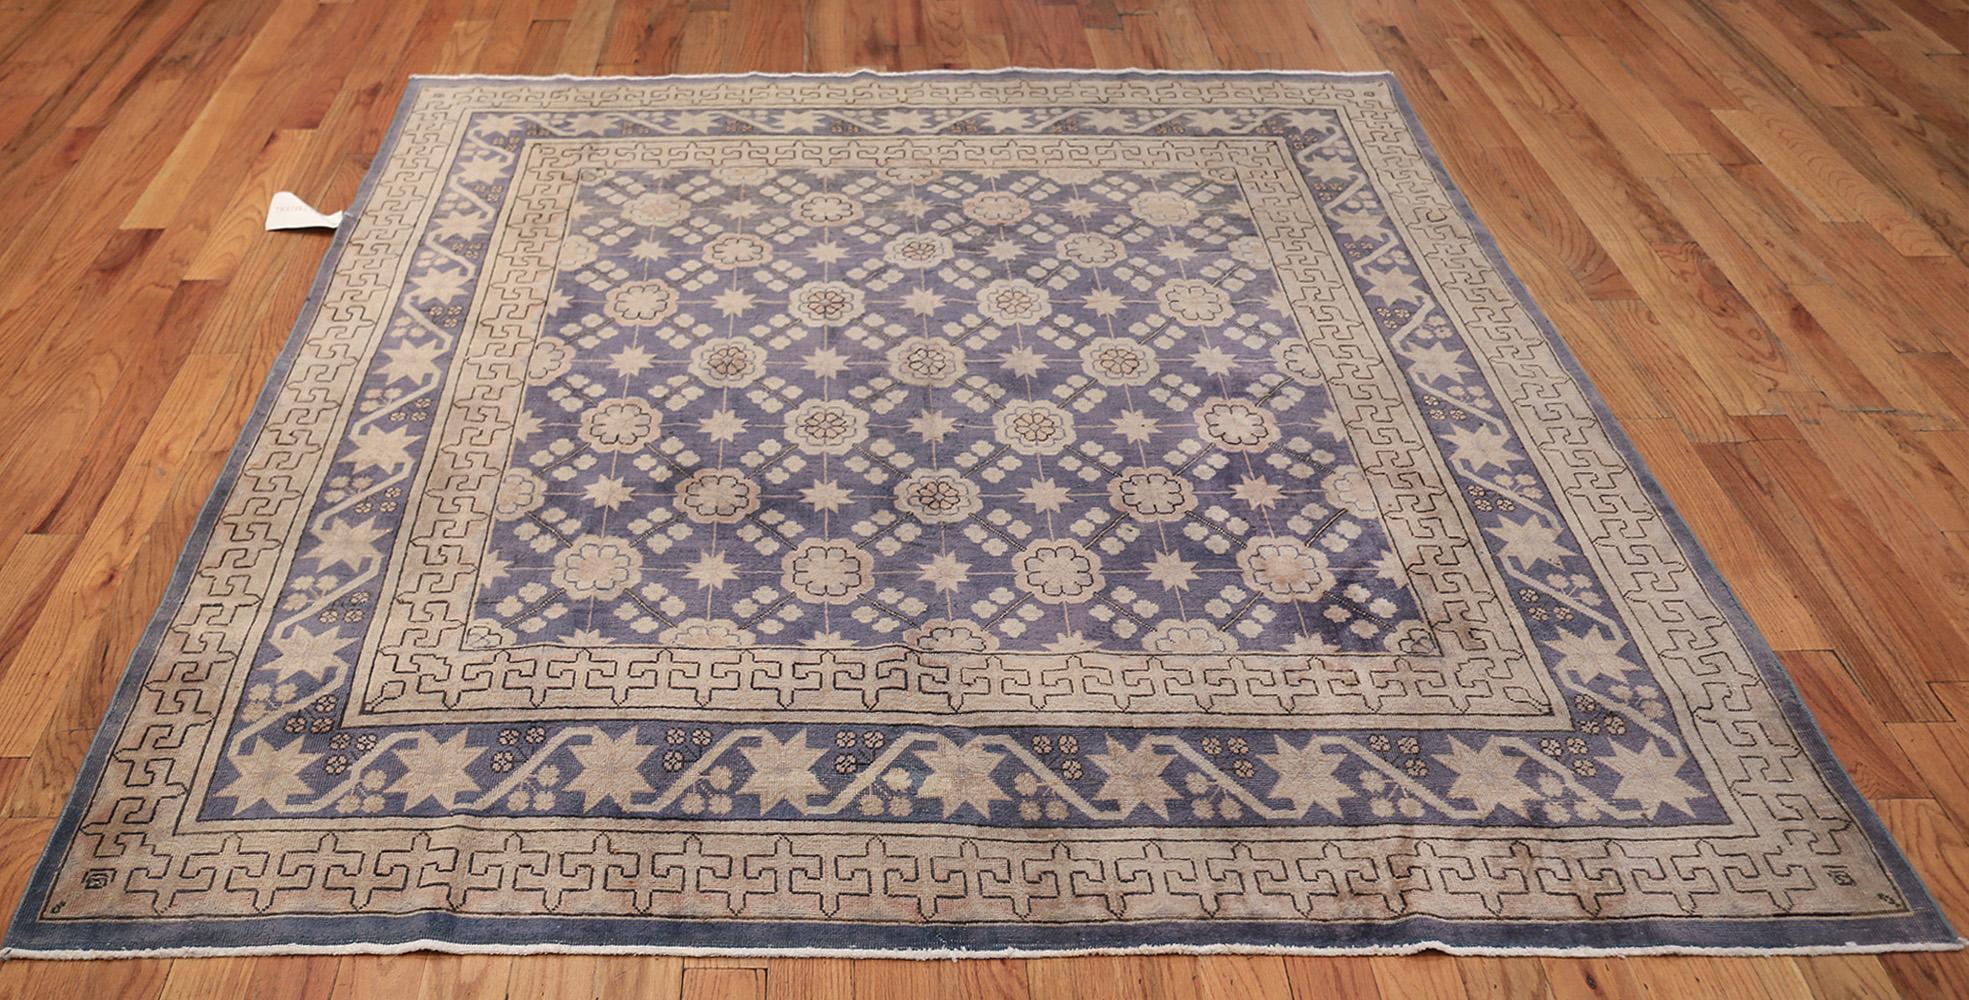 Antique Khotan rugs, antique rugs from the city of Khotan have a style that is all their own. These exceptional rugs make the legends of Marco Polo and the Silk Road come alive. Khotan is an oasis and an age-old center for international design. From